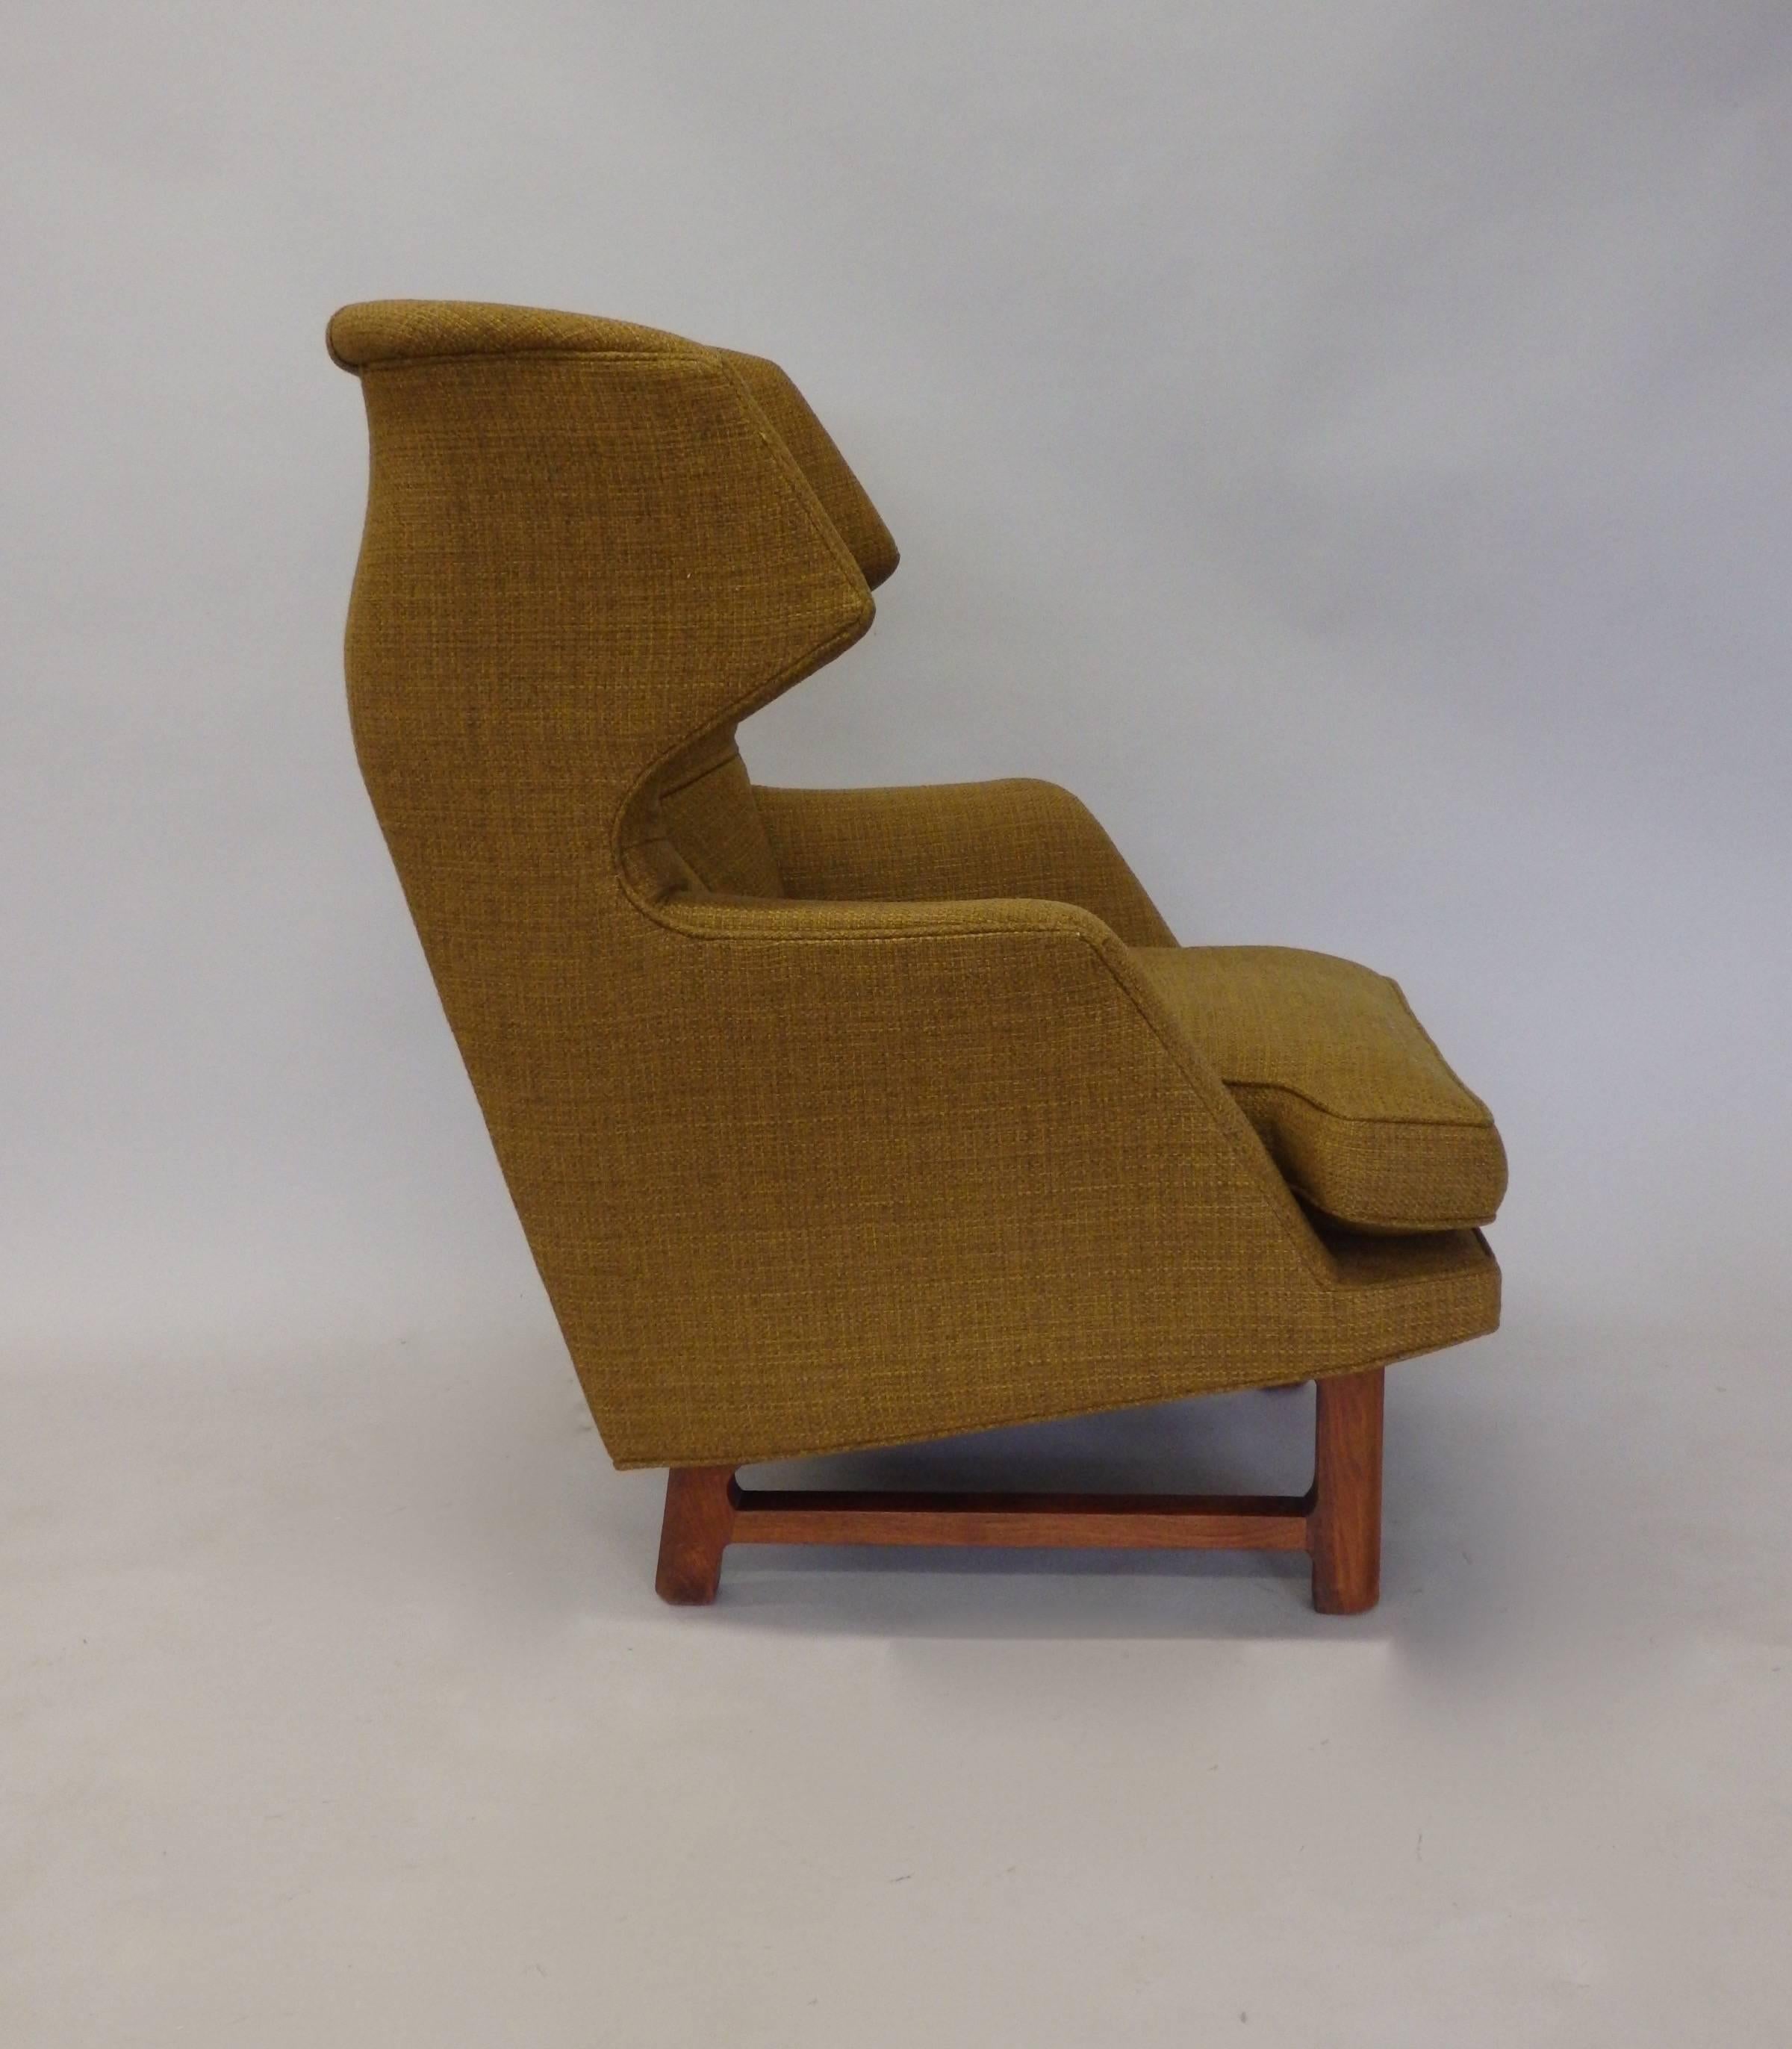 American Edward Wormley for Dunbar Modernist Janus collection Wingback Lounge Chair